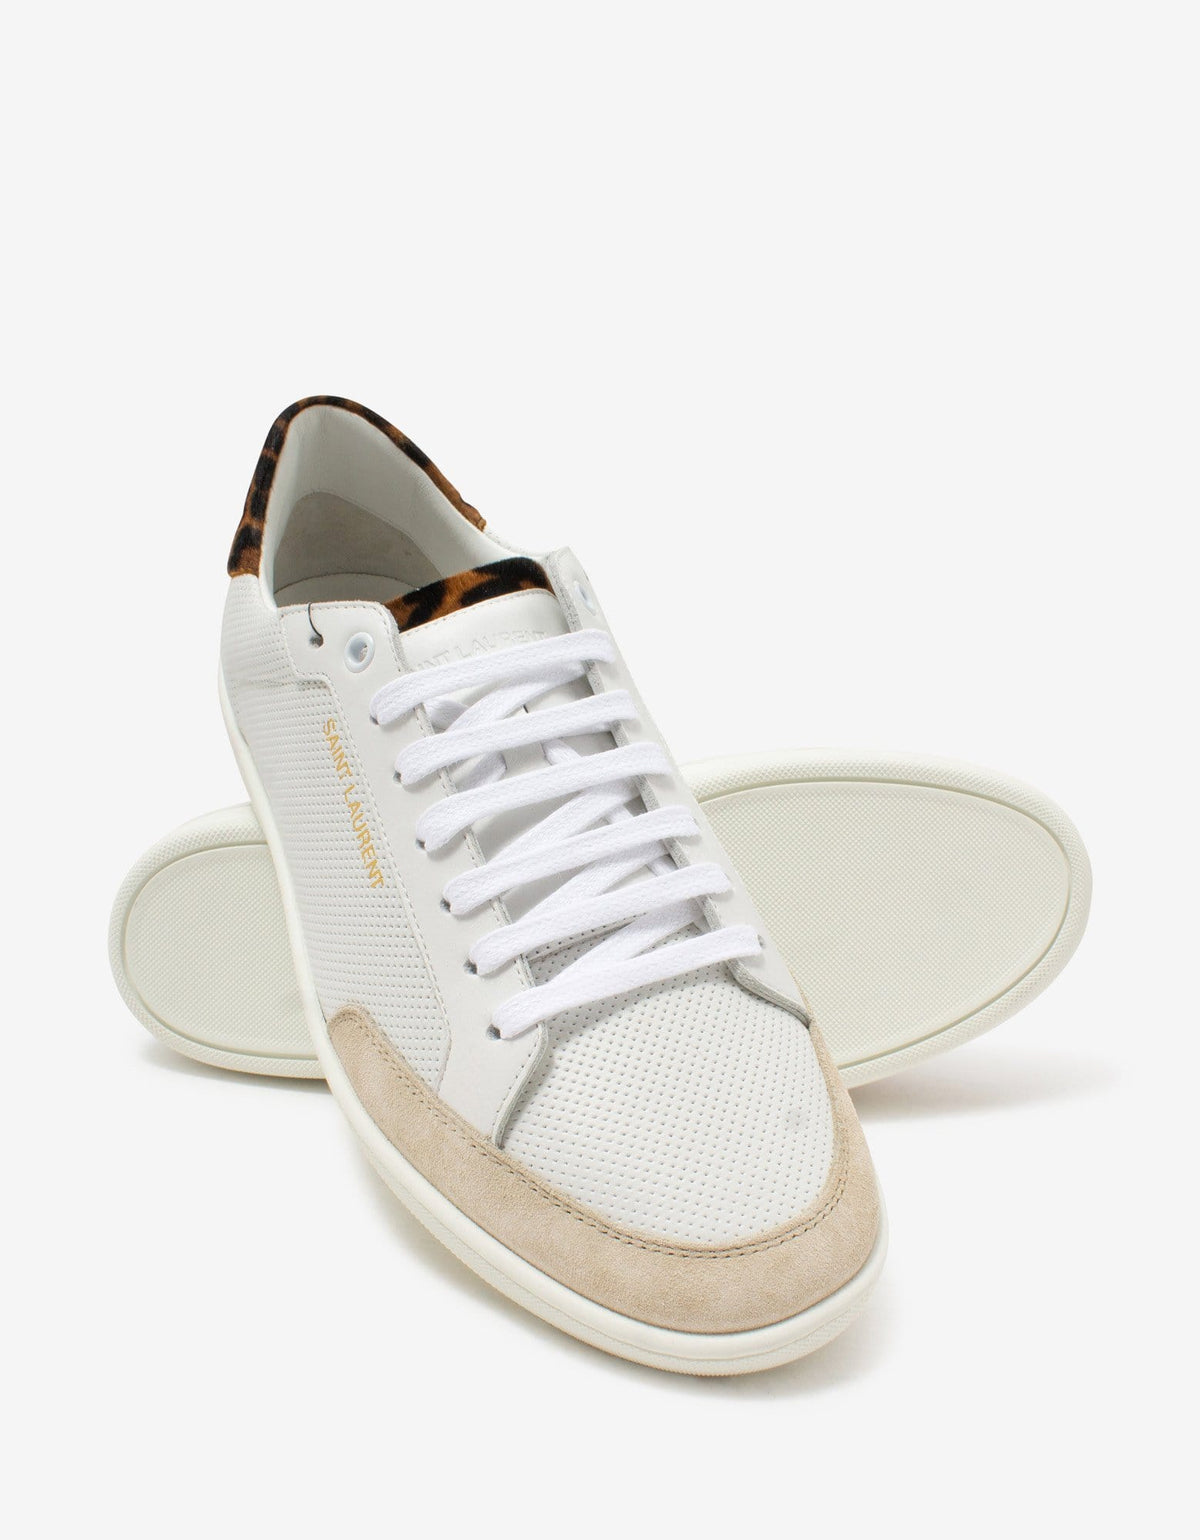 Saint Laurent Court Classic SL/10 White Perforated Leather Trainers